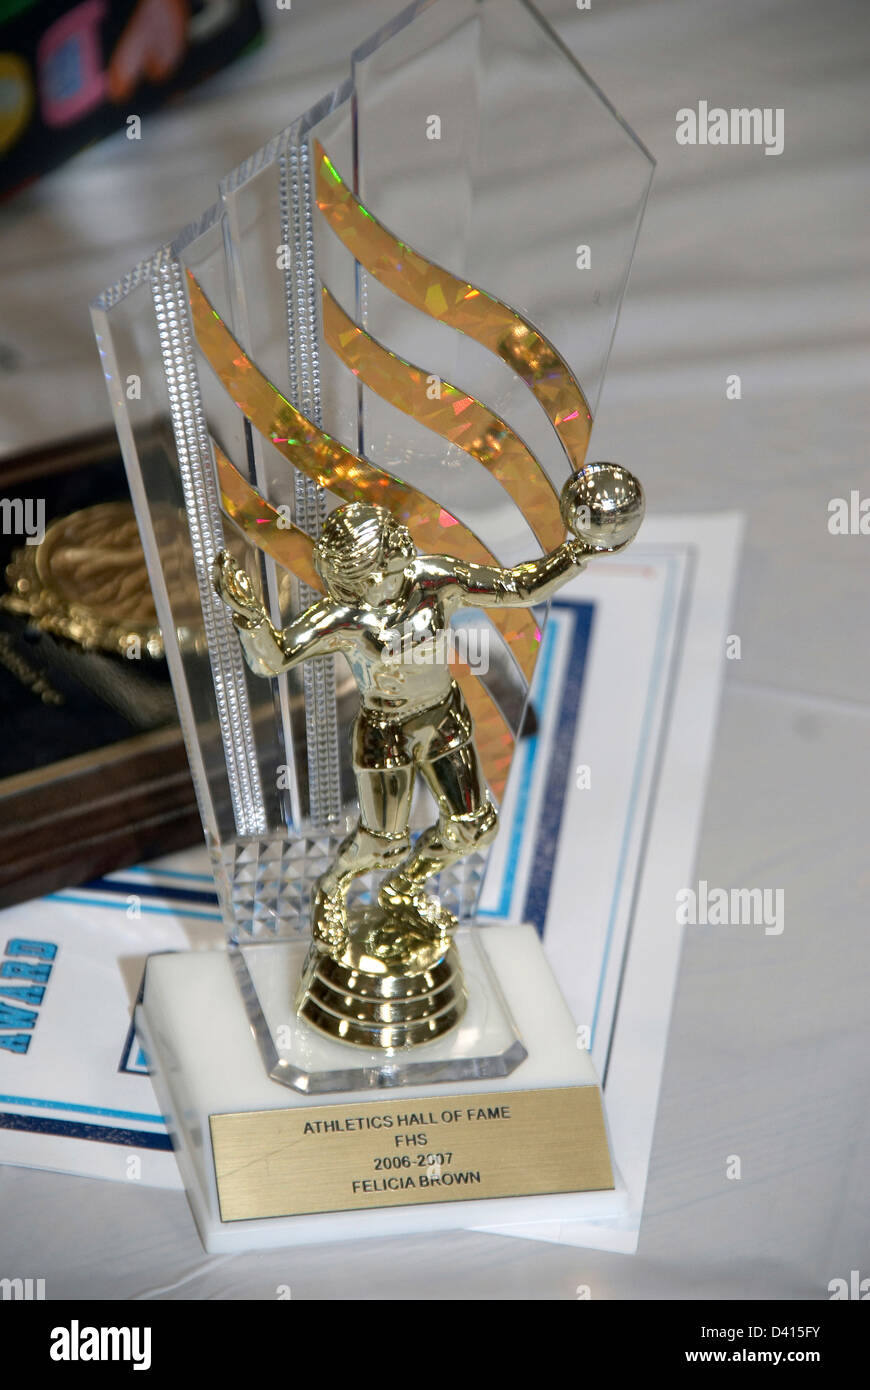 Un atletico Hall of Fame trophy Foto Stock